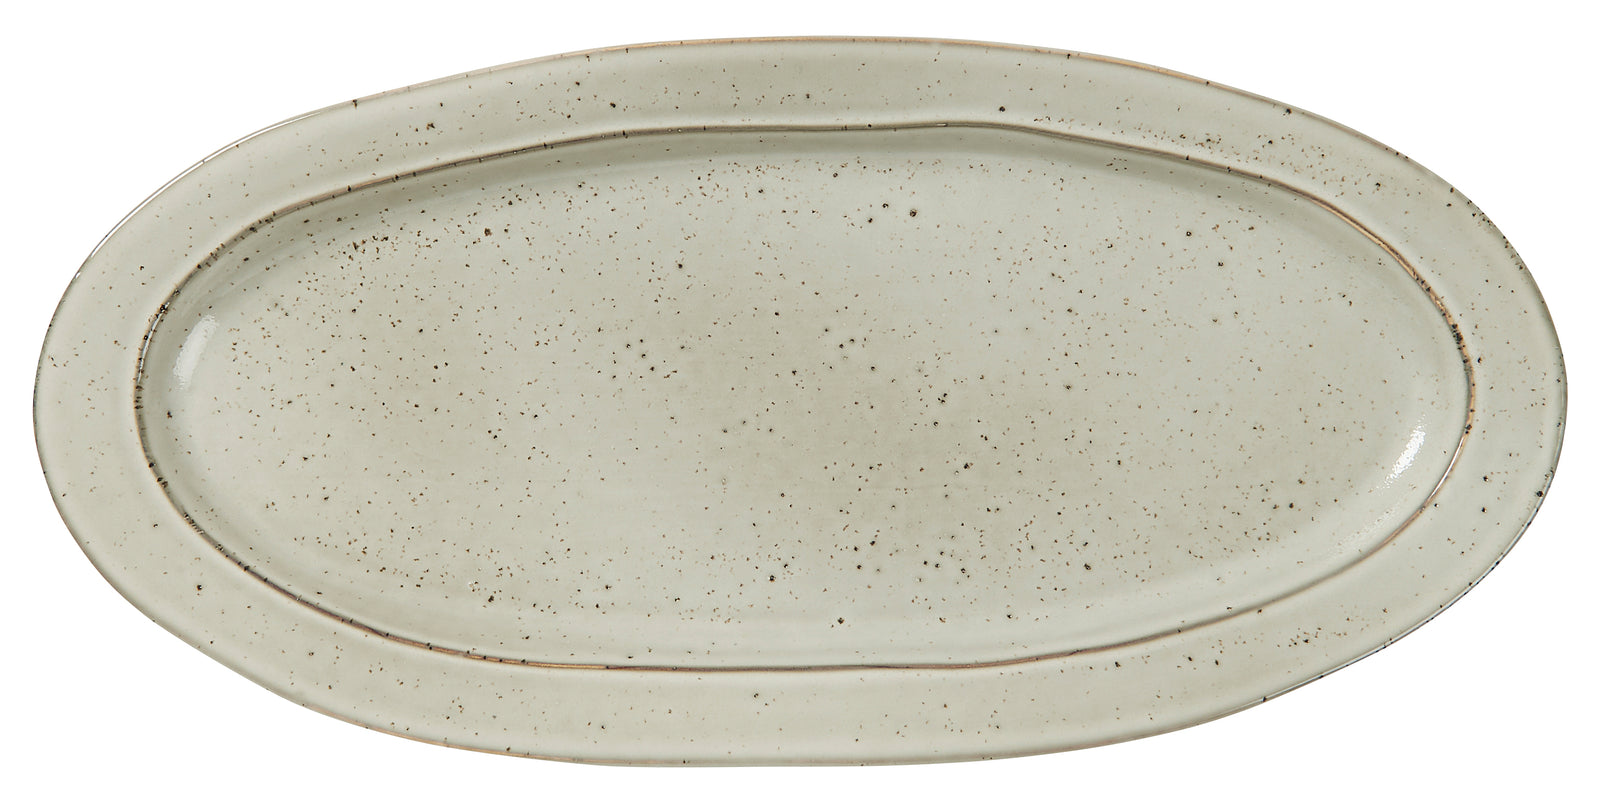 Danish Stone Ware Oval Serving Plate